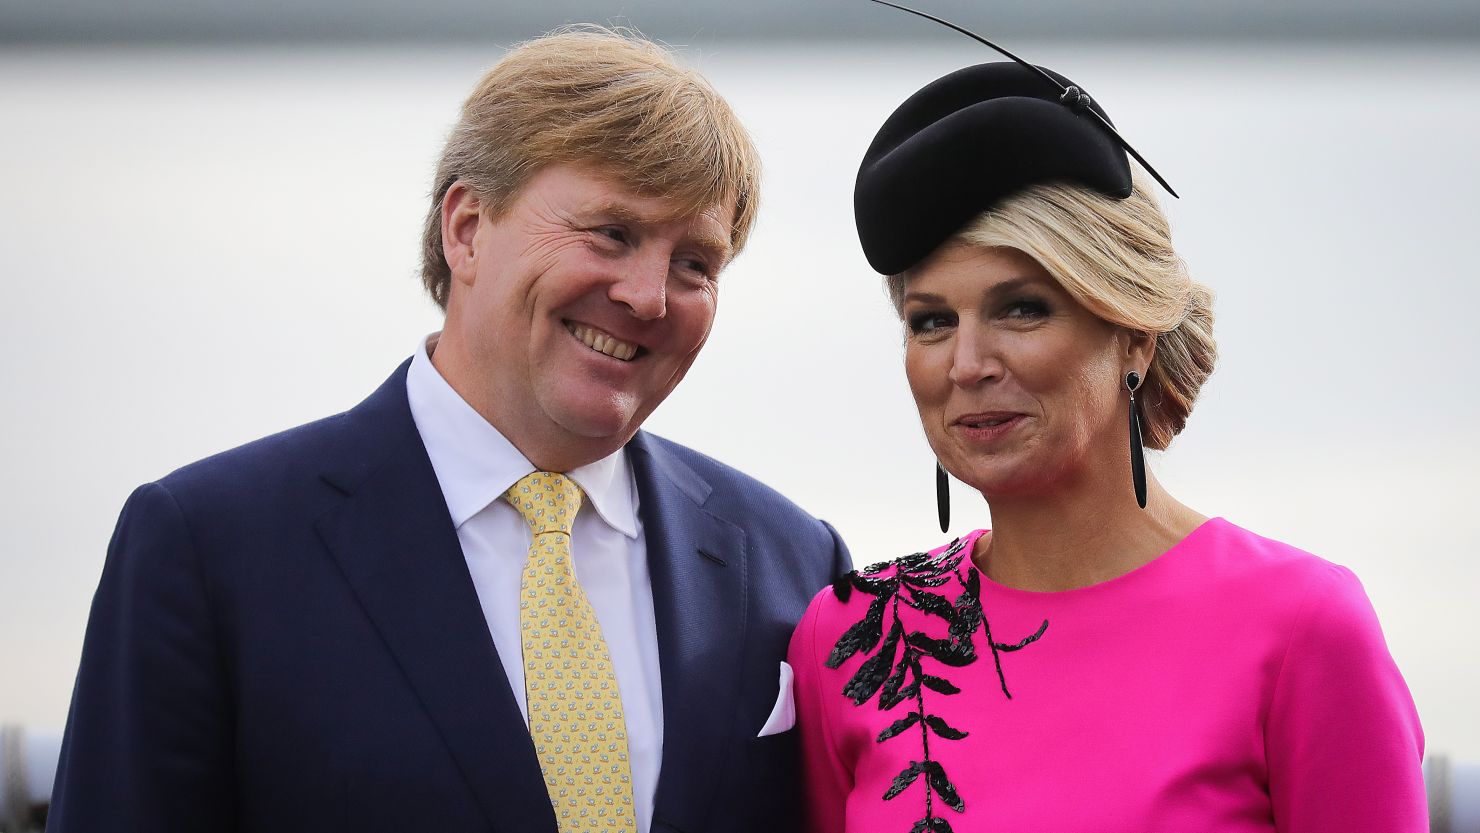 King Willem-Alexander and Queen Maxima on a visit to London in 2018.